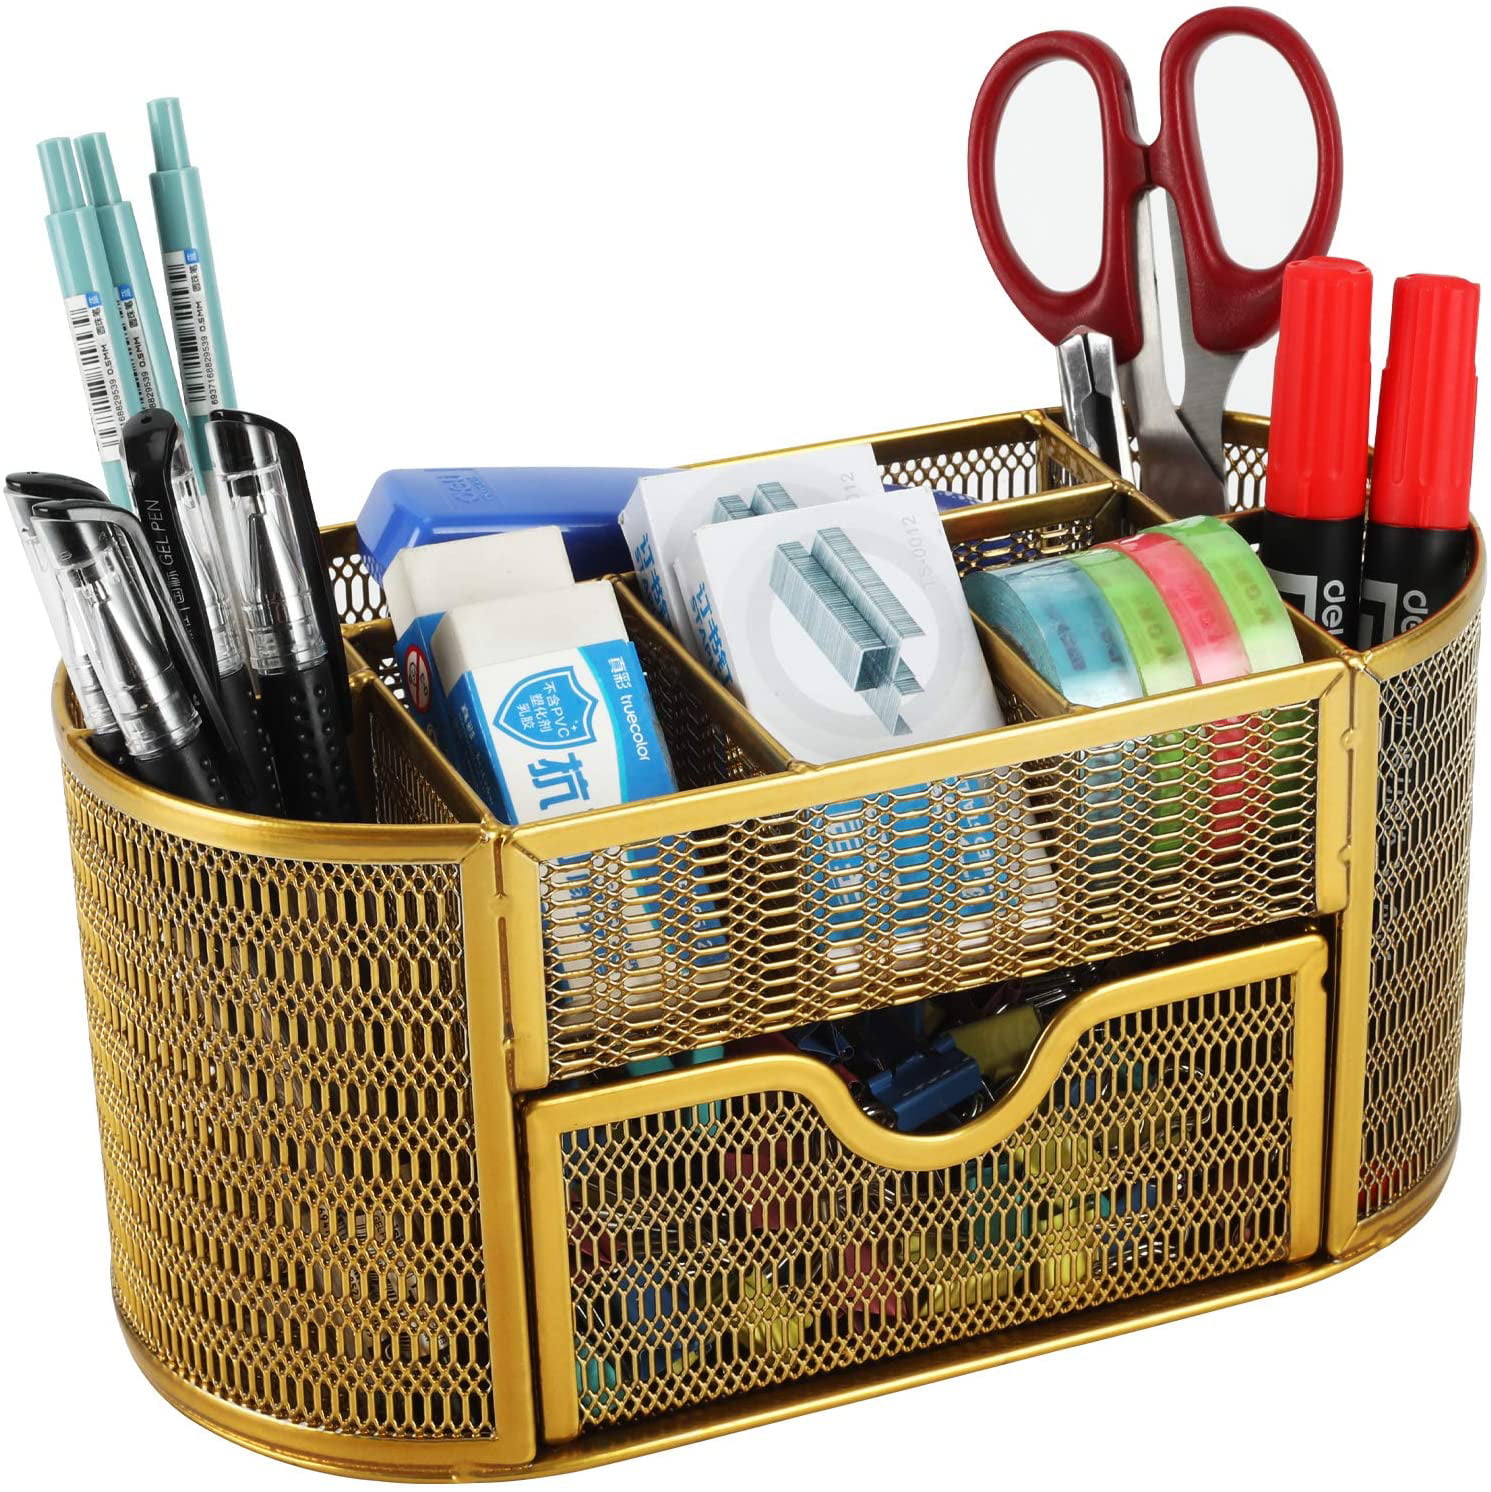 Home Mesh Desk Organizer School Refand Desktop Office Supplies Multi-Functional Caddy Pen Holder Stationery with 6 Compartments and 1 Drawer for Office Classroom 